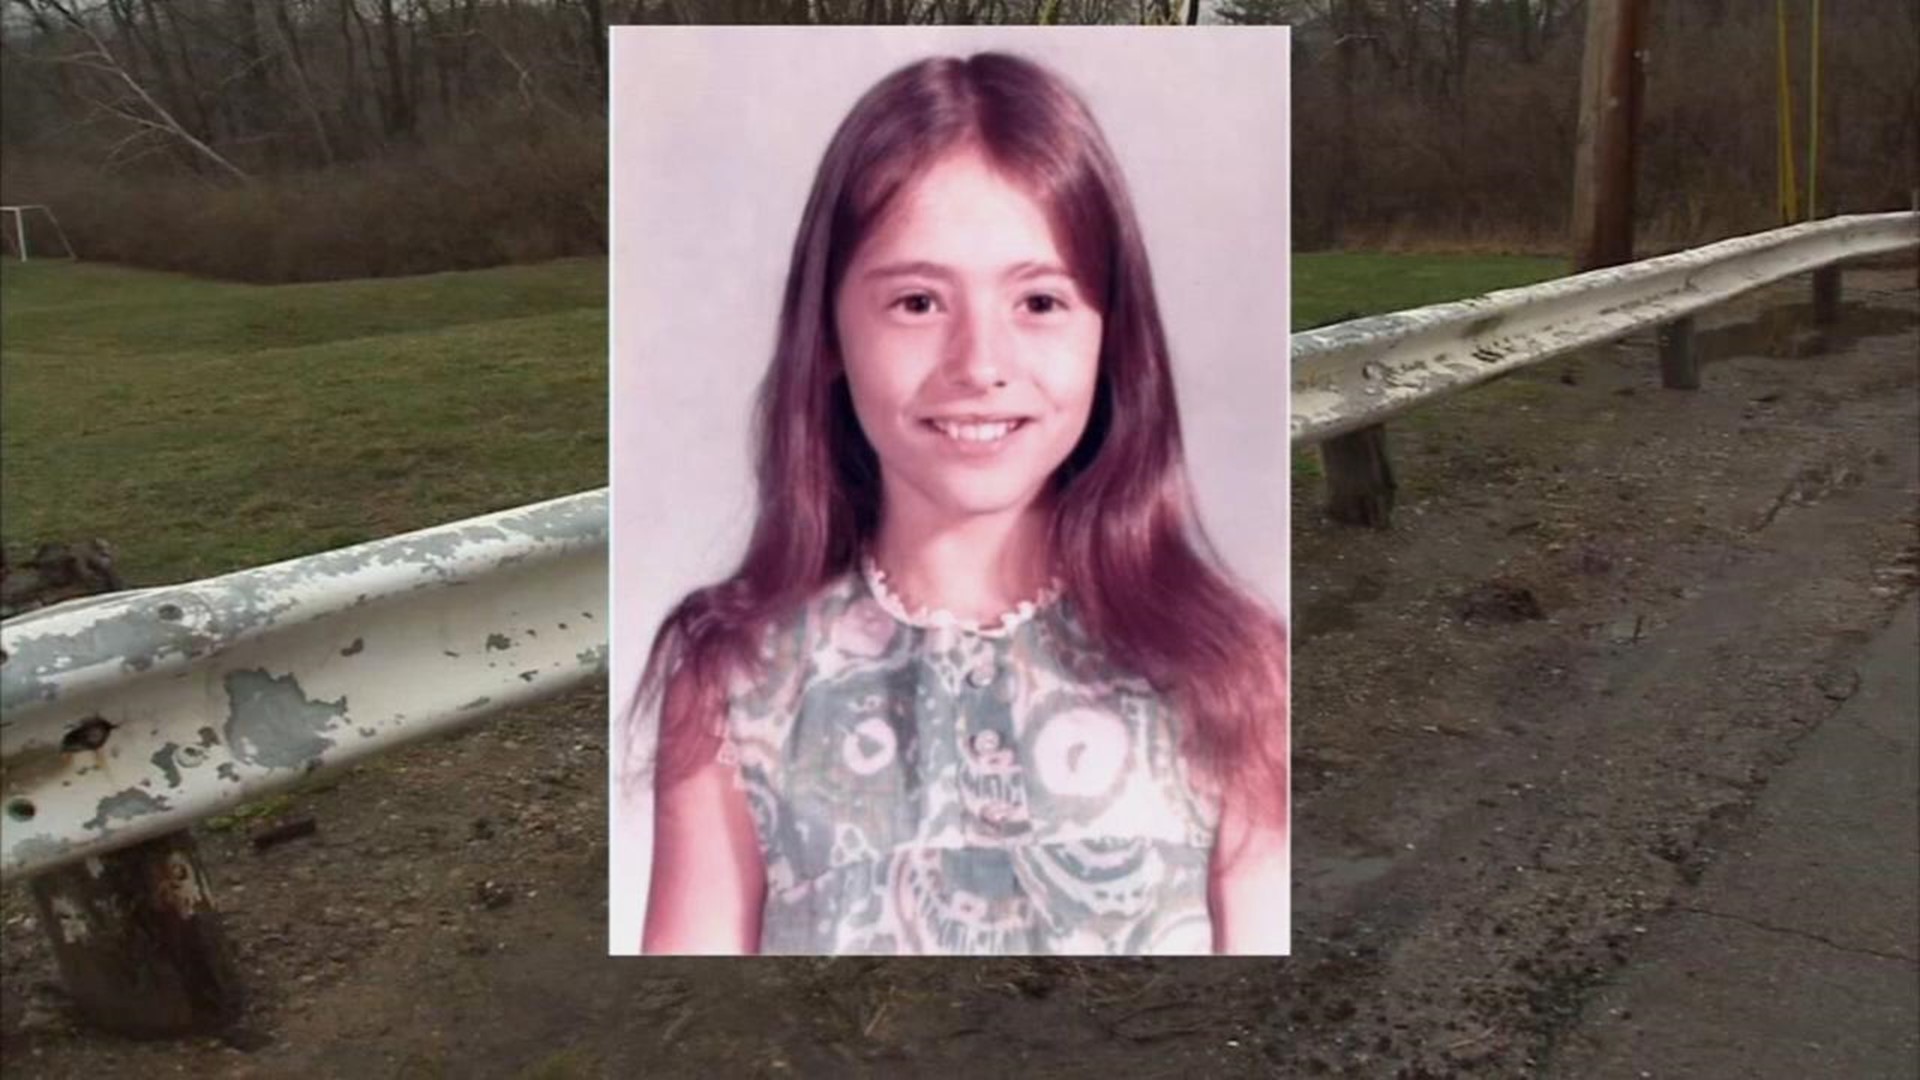 Who Killed Christie Mullins? New Test Could Crack Decades-Old Cold Case